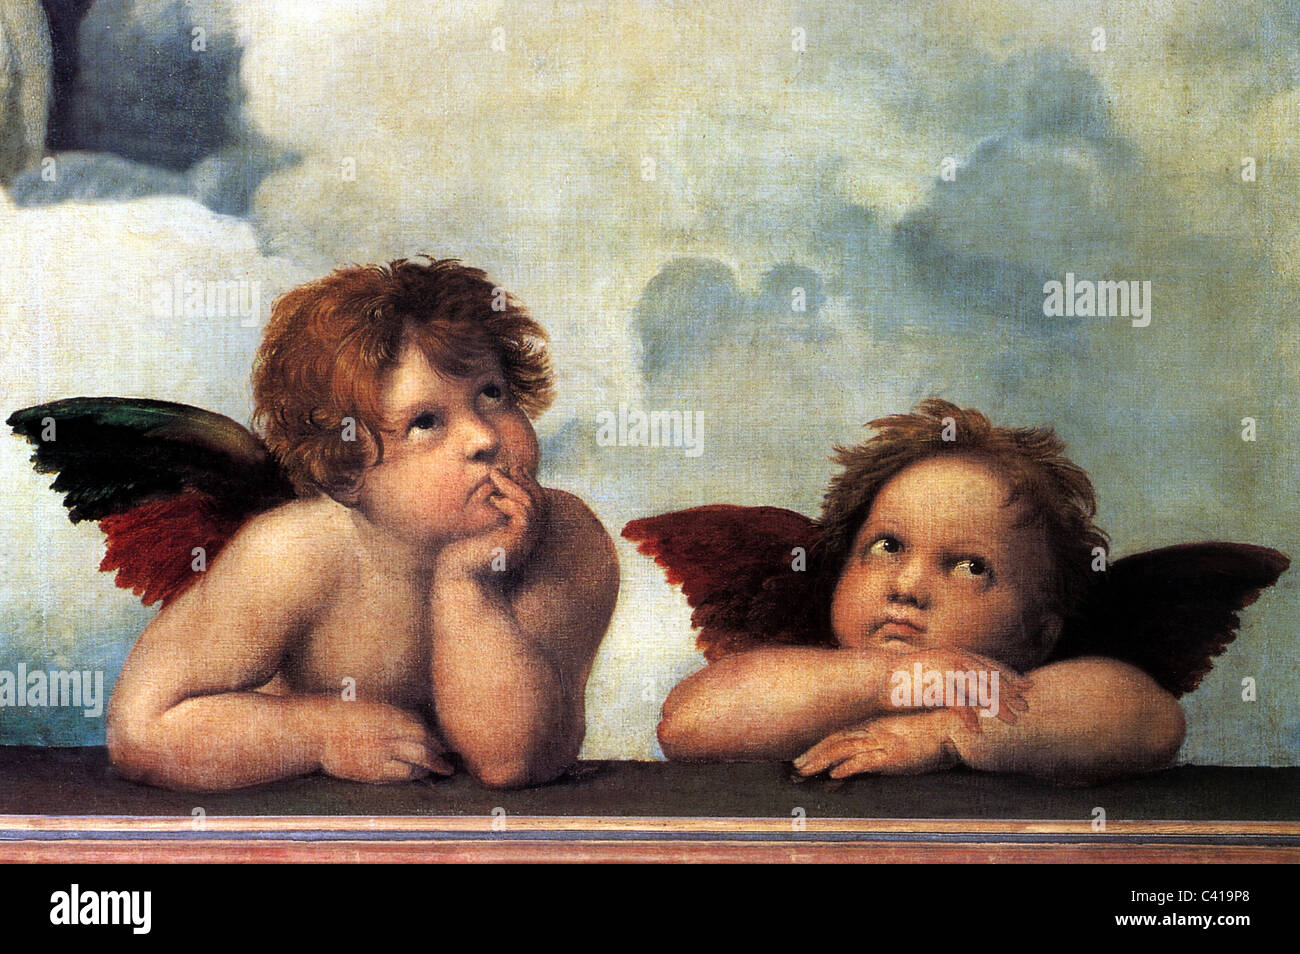 fine arts, Raphael, Santi: 'The Angels of the Sistine Madonna', detail from the painting 'Sistine Madonna', 1512/1513, Gemaeldegalerie Alte Meister, Dresden, Additional-Rights-Clearences-Not Available Stock Photo